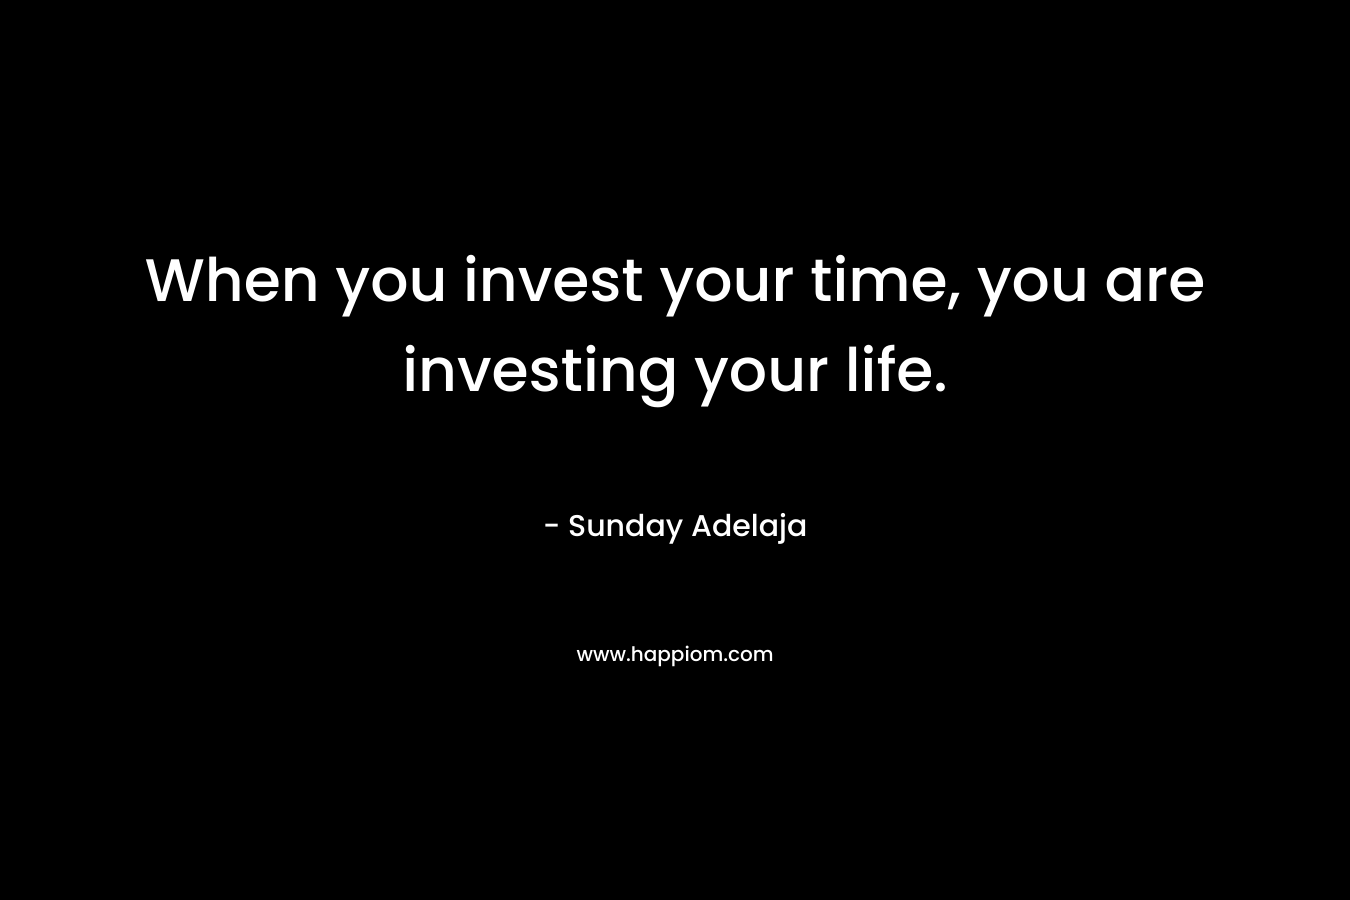 When you invest your time, you are investing your life.